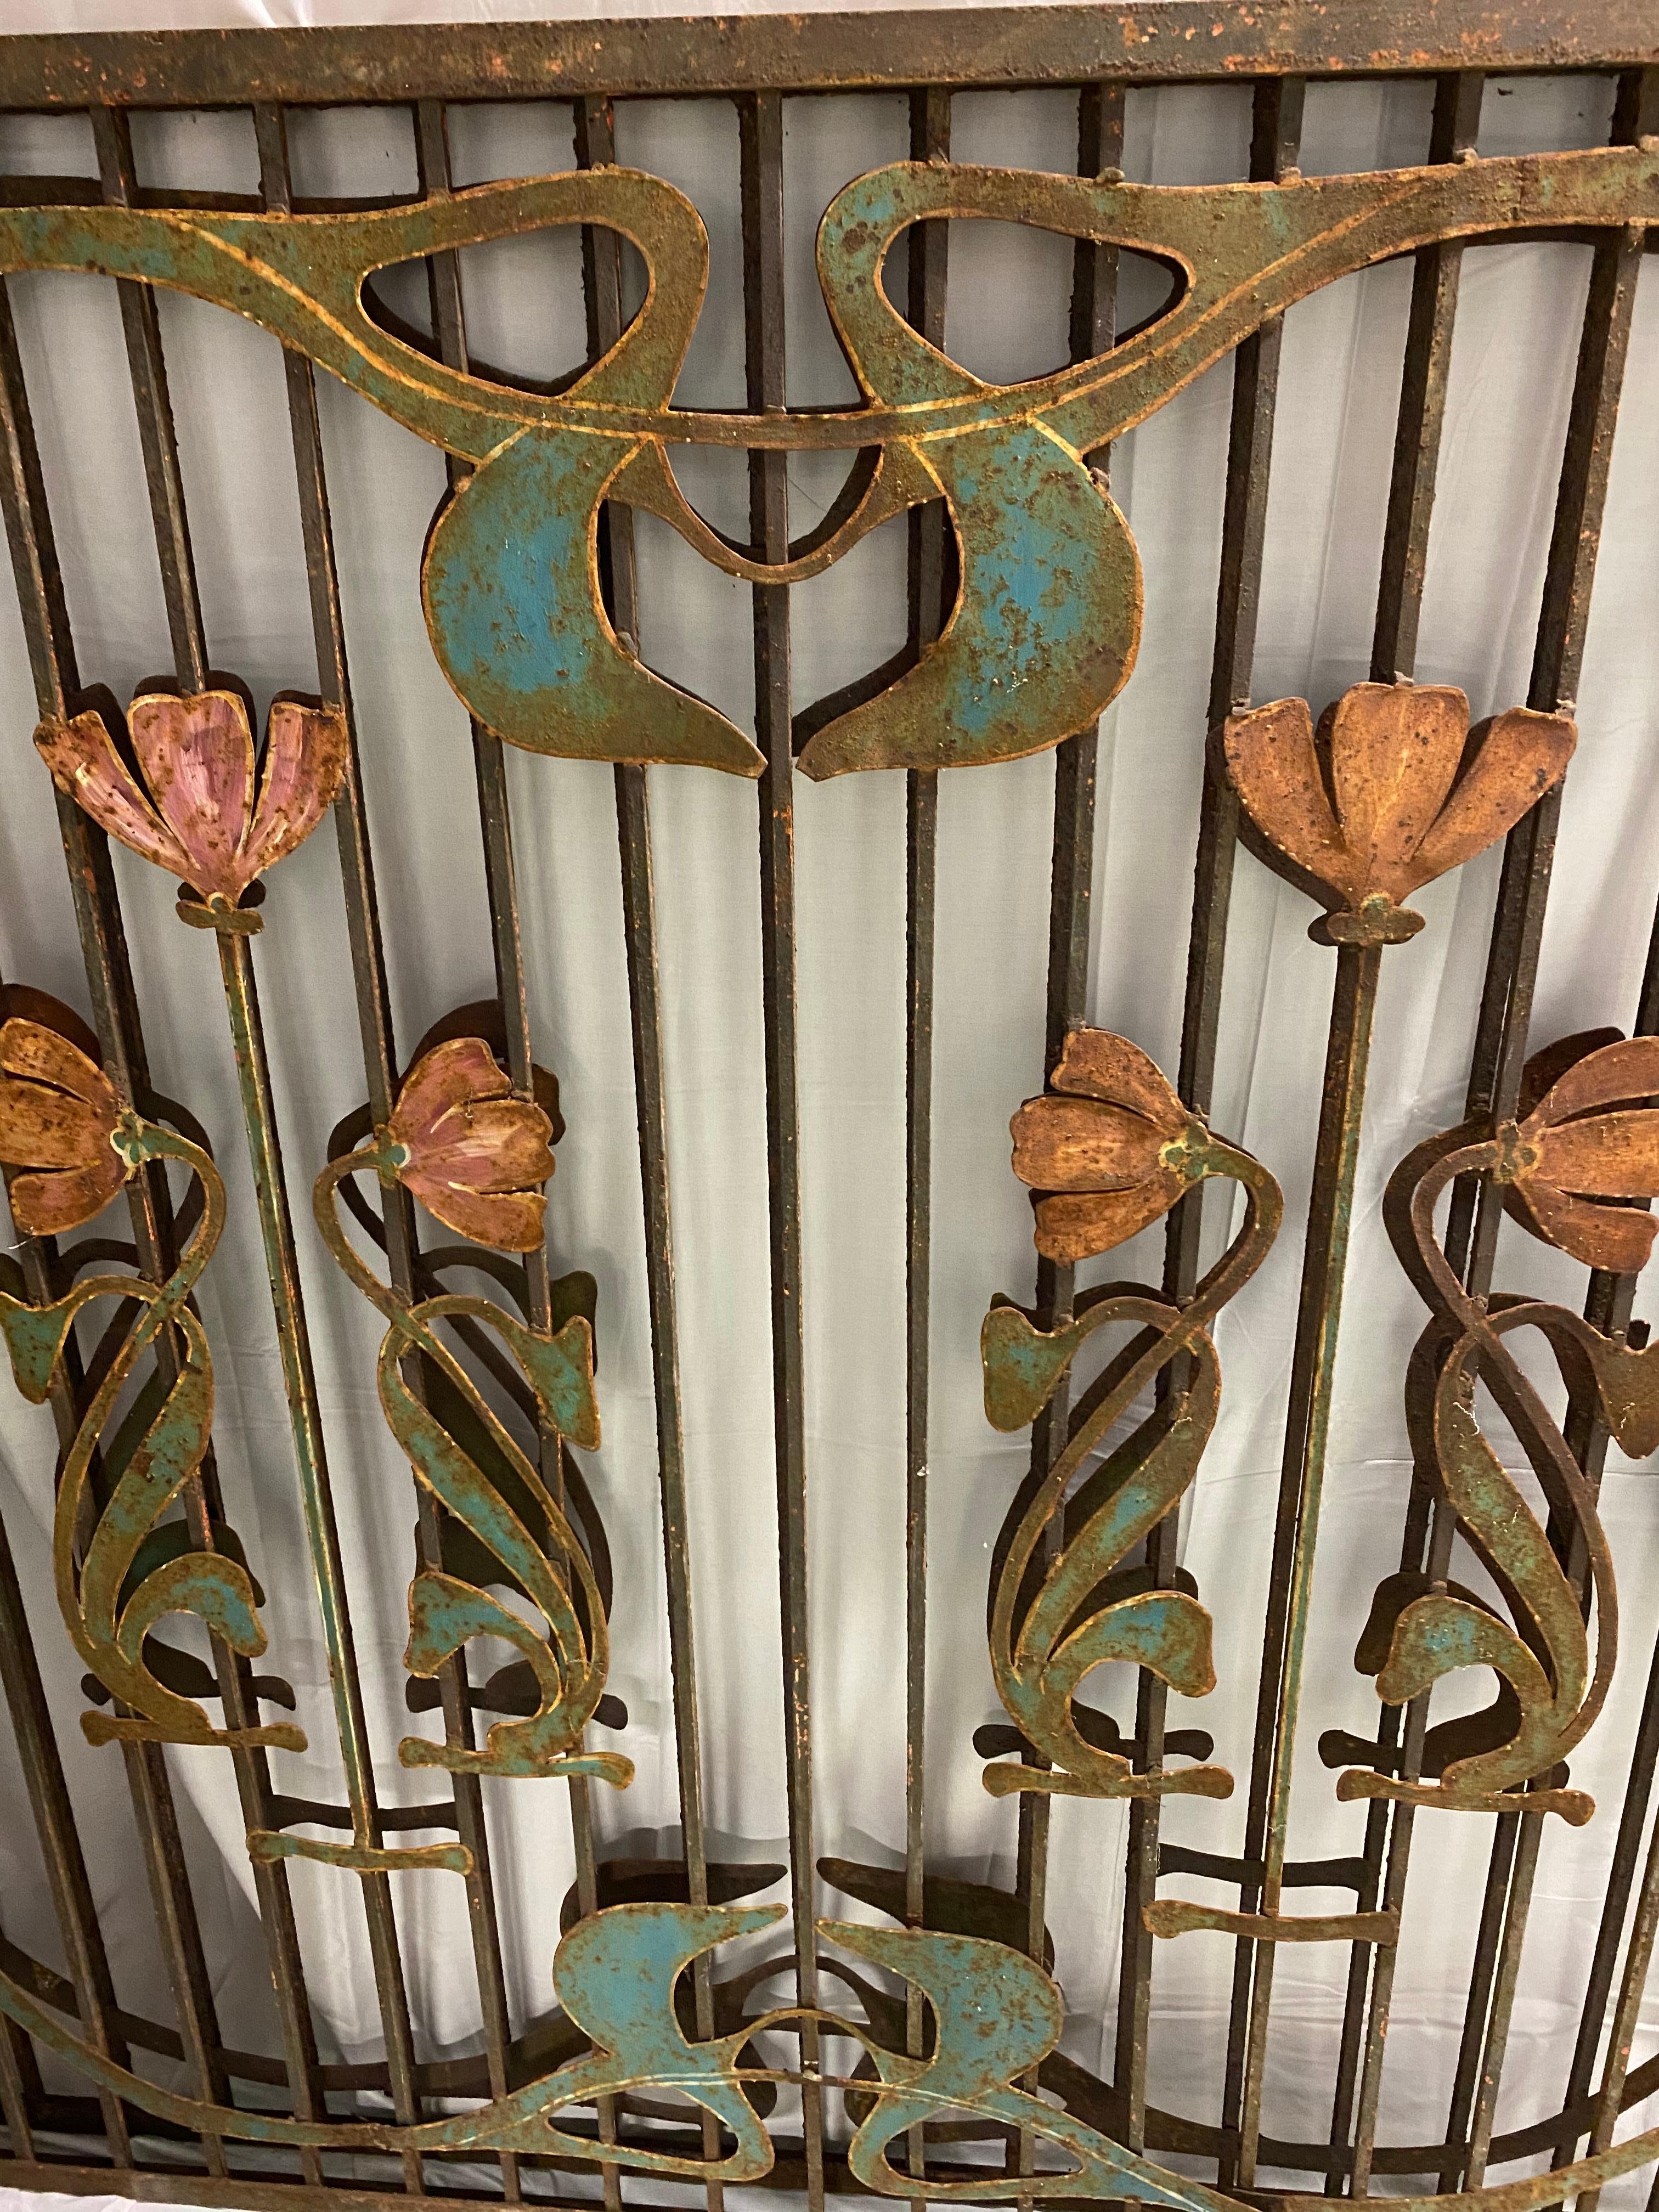 Pair of French Art Nouveau Wrought Iron Garden Gates, Early 20th Century For Sale 1